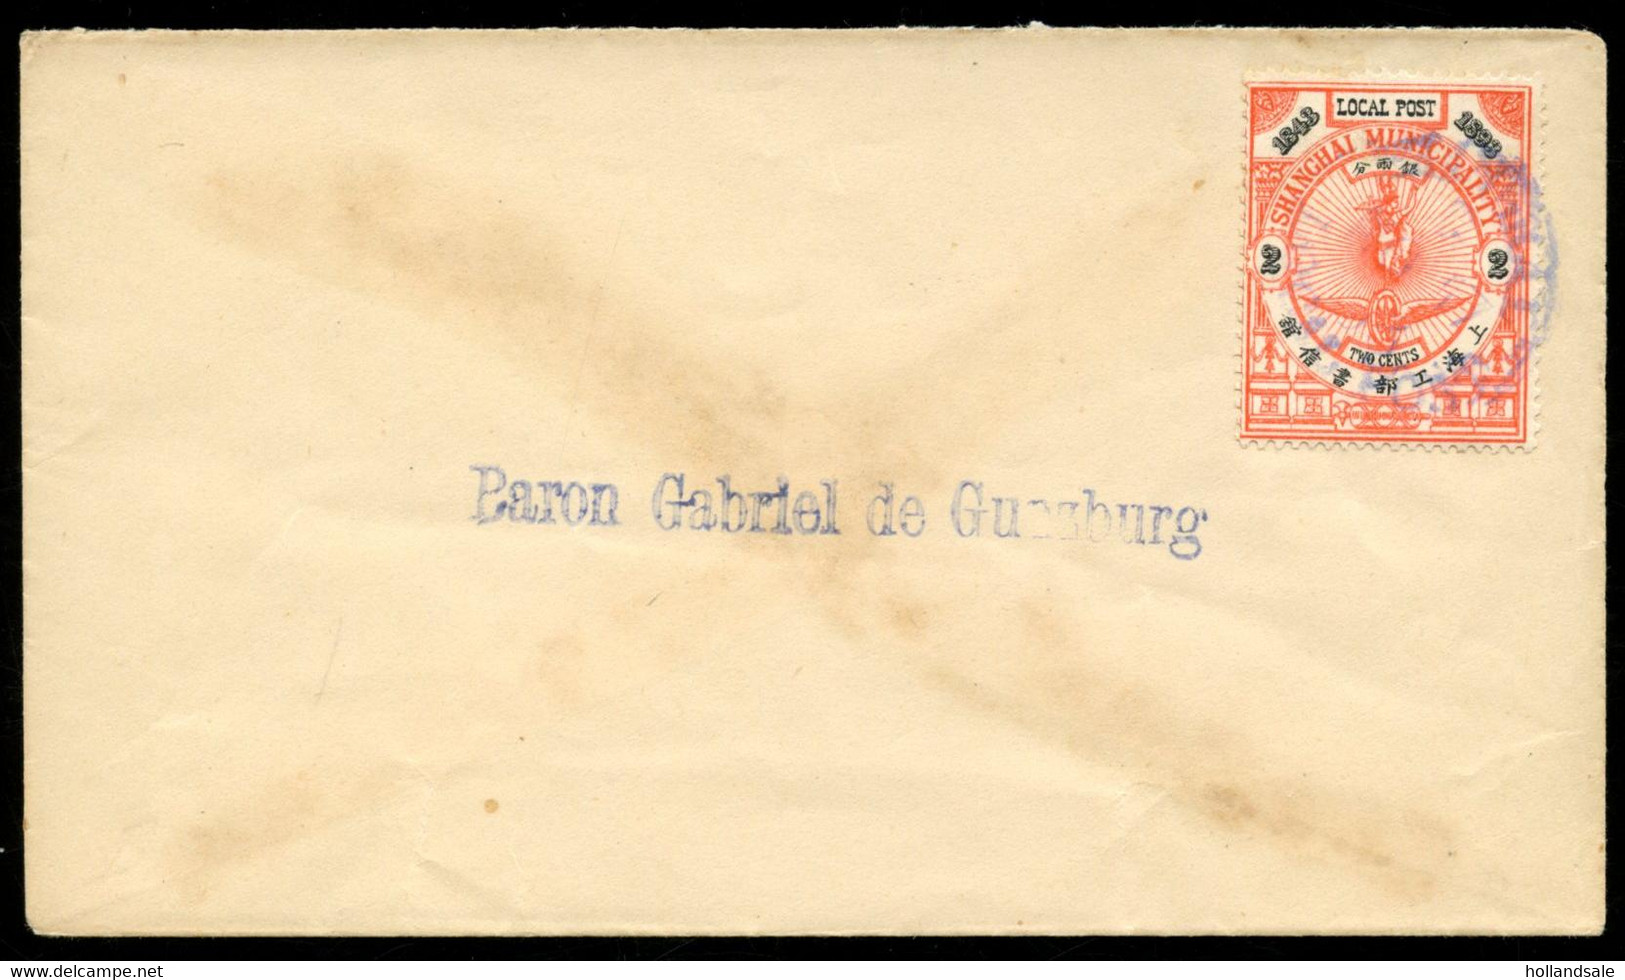 CHINA SHANGHAI - Baron De Gunzberg Cover Sent Local. Franked With 2c MICHEL #126a. A Bit Toned. - Lettres & Documents